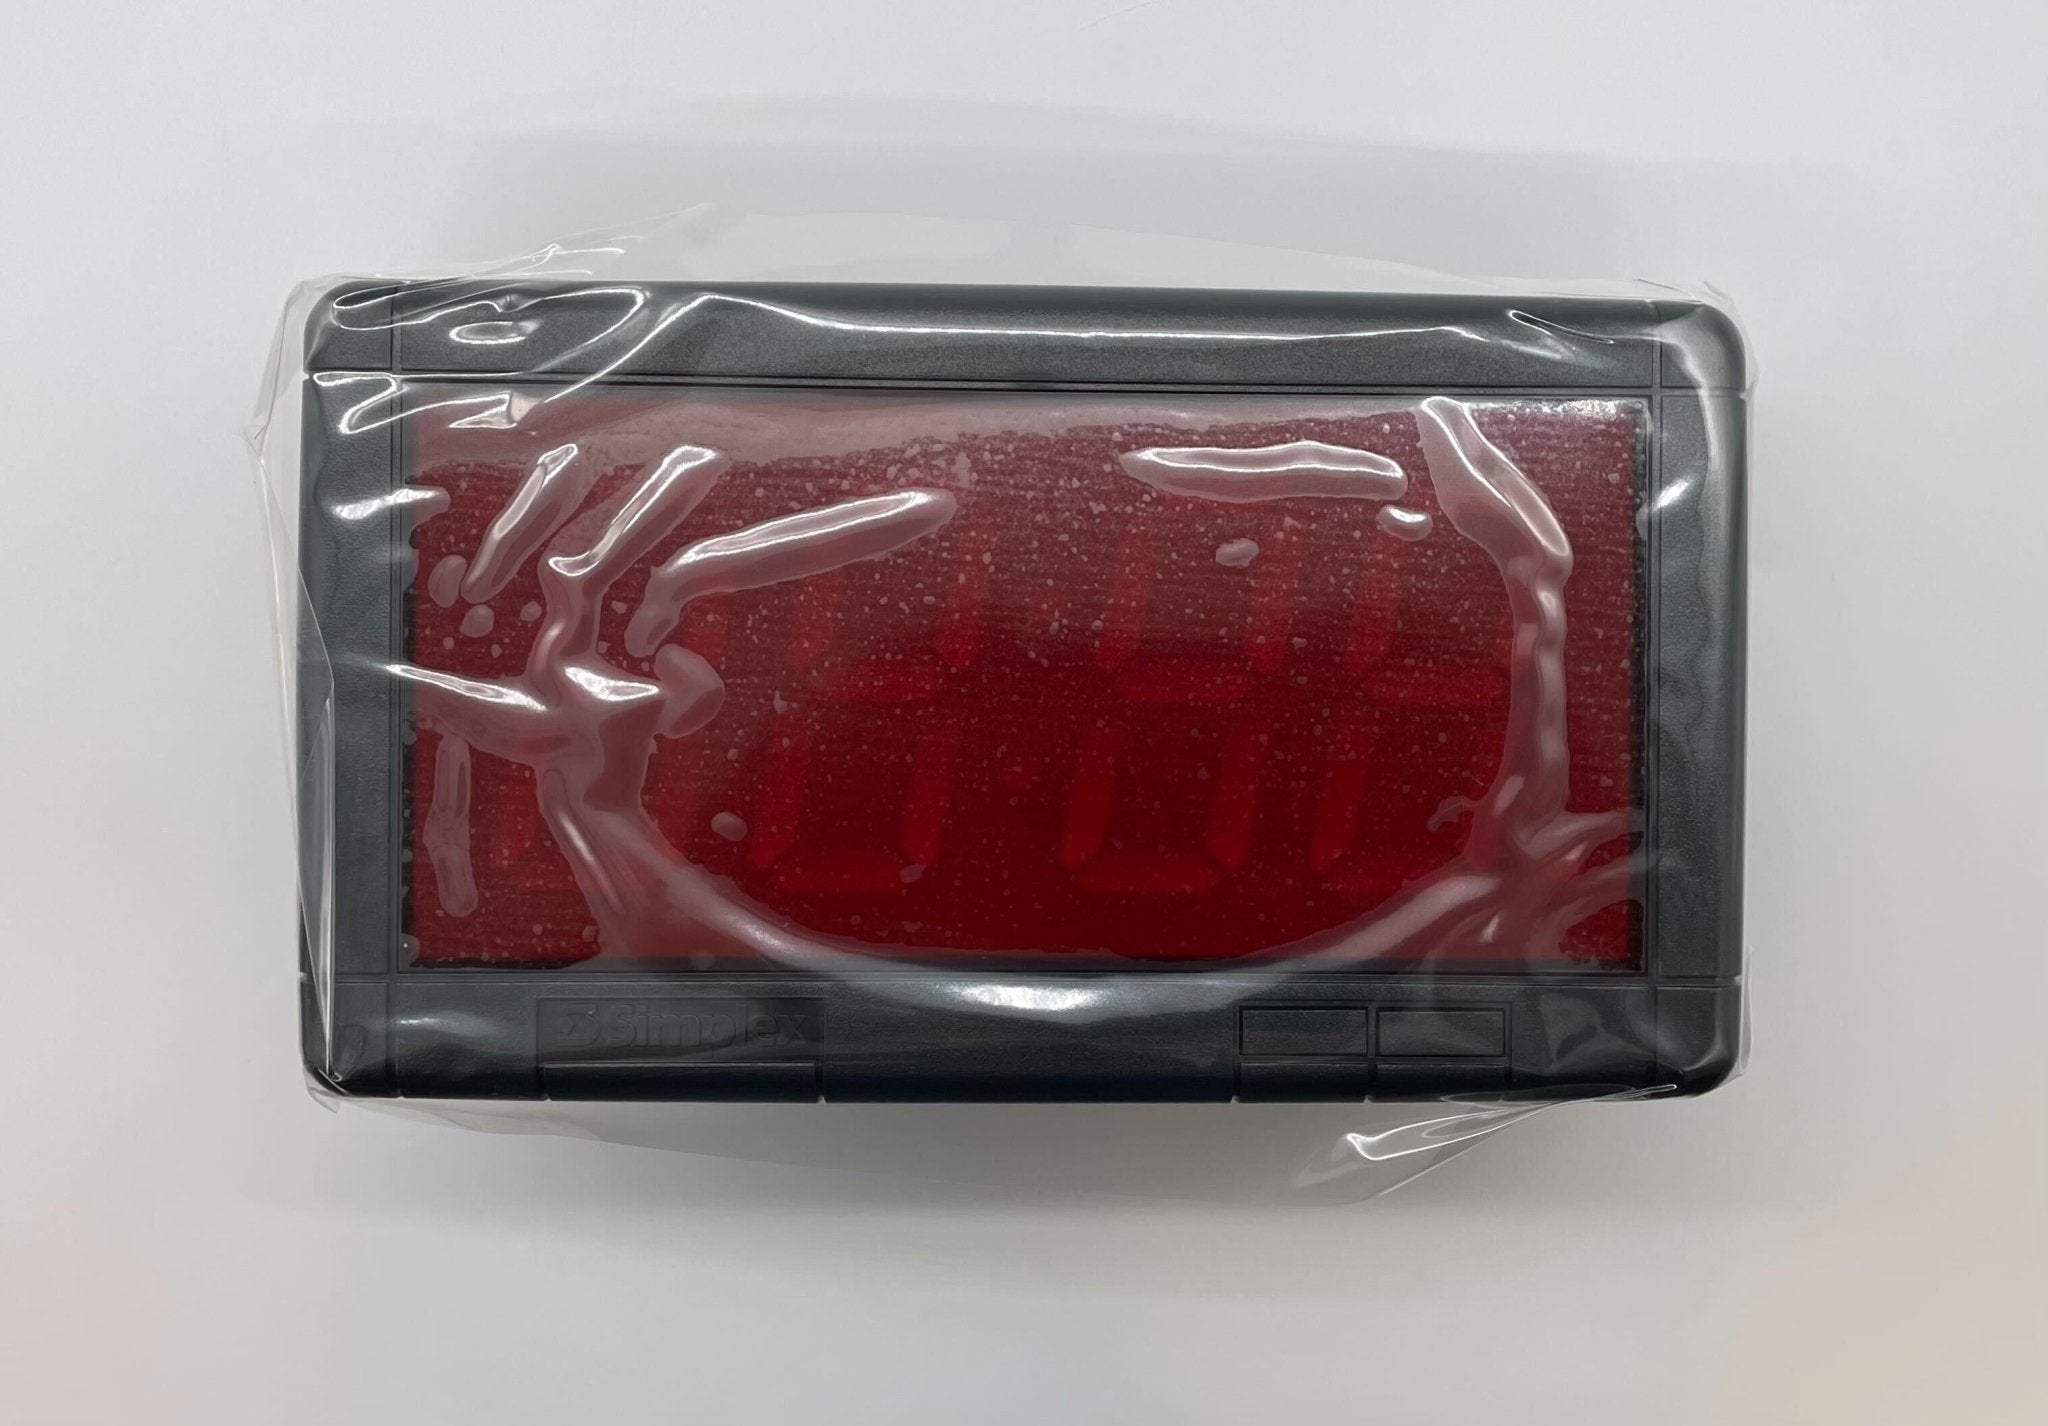 Simplex 6334-9135 2.5 Red Led Clk 230 Vac - The Fire Alarm Supplier